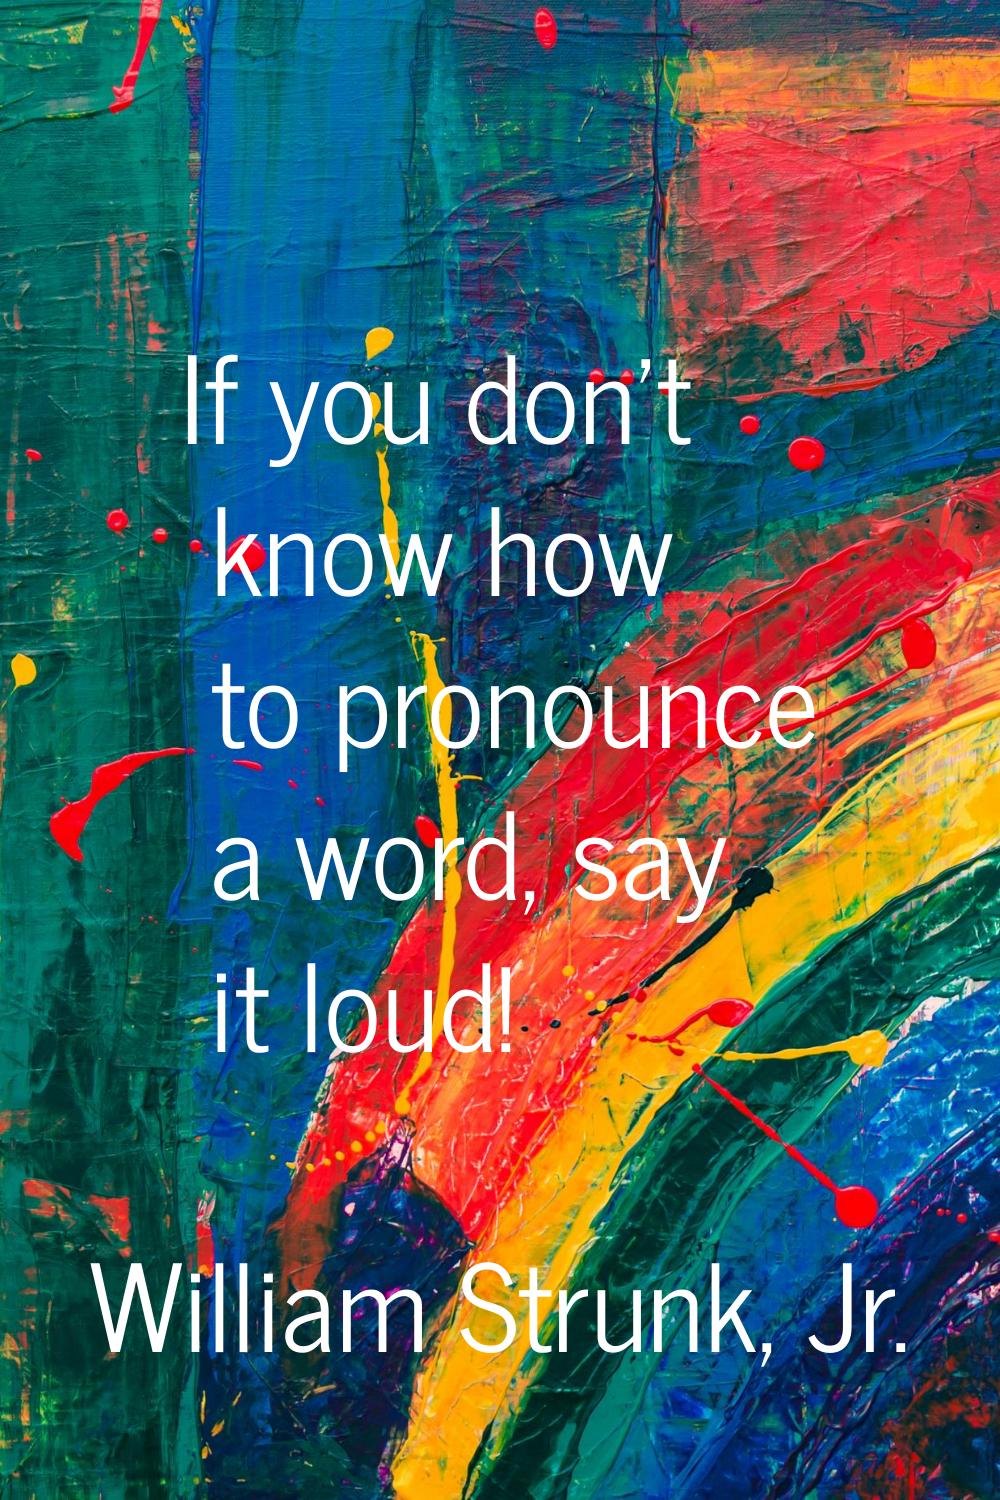 If you don't know how to pronounce a word, say it loud!